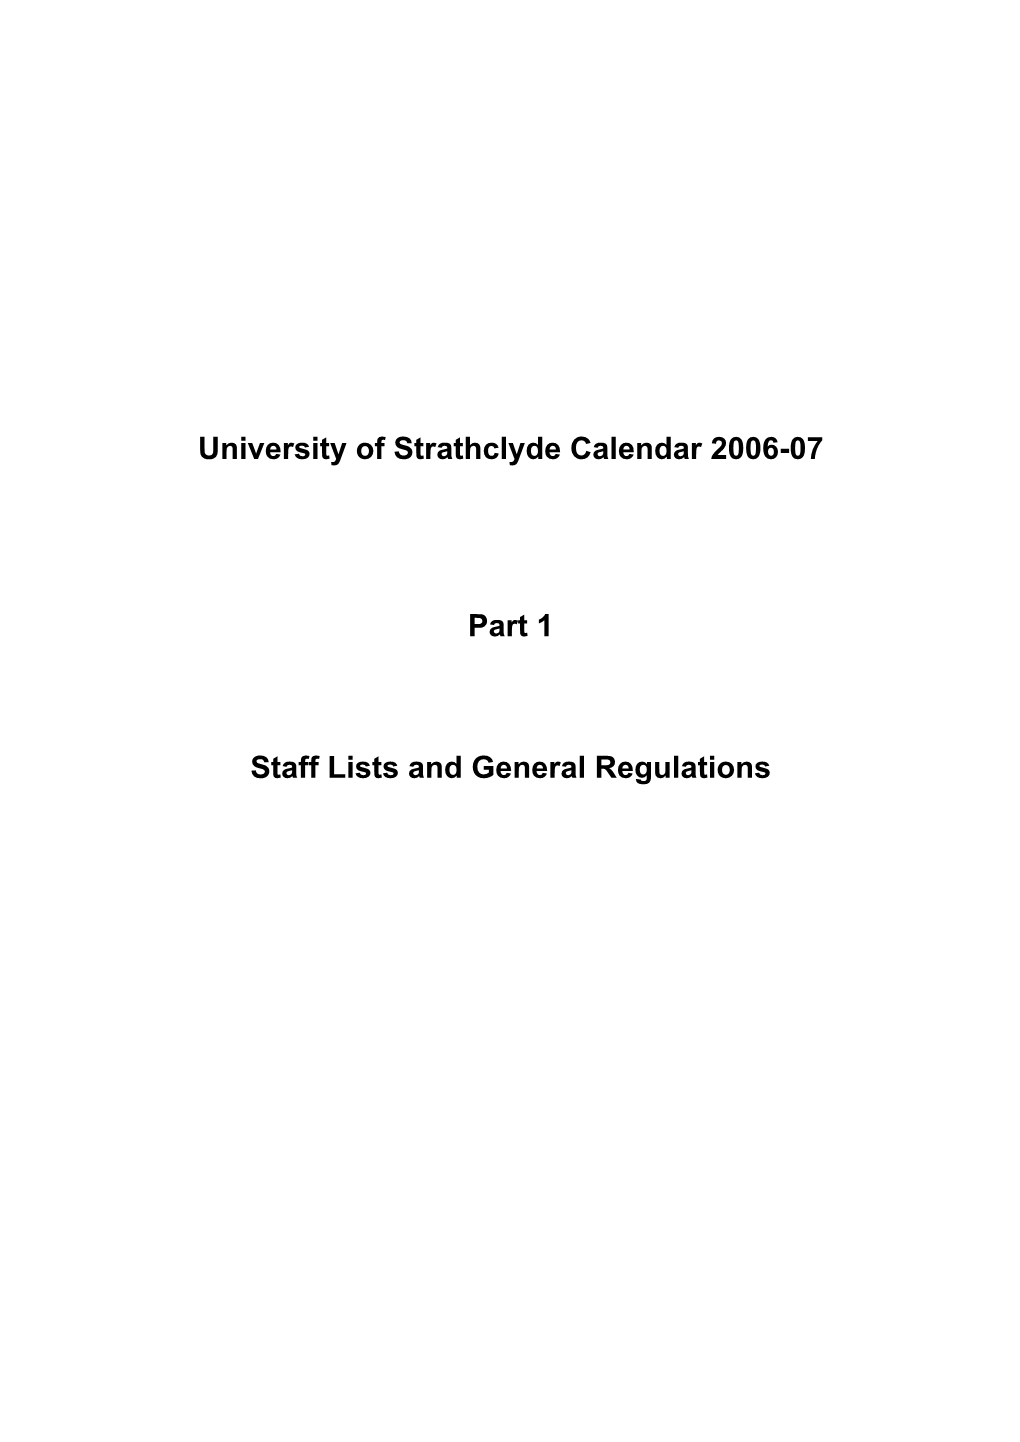 University of Strathclyde Calendar 2006-07 Part 1 Staff Lists And